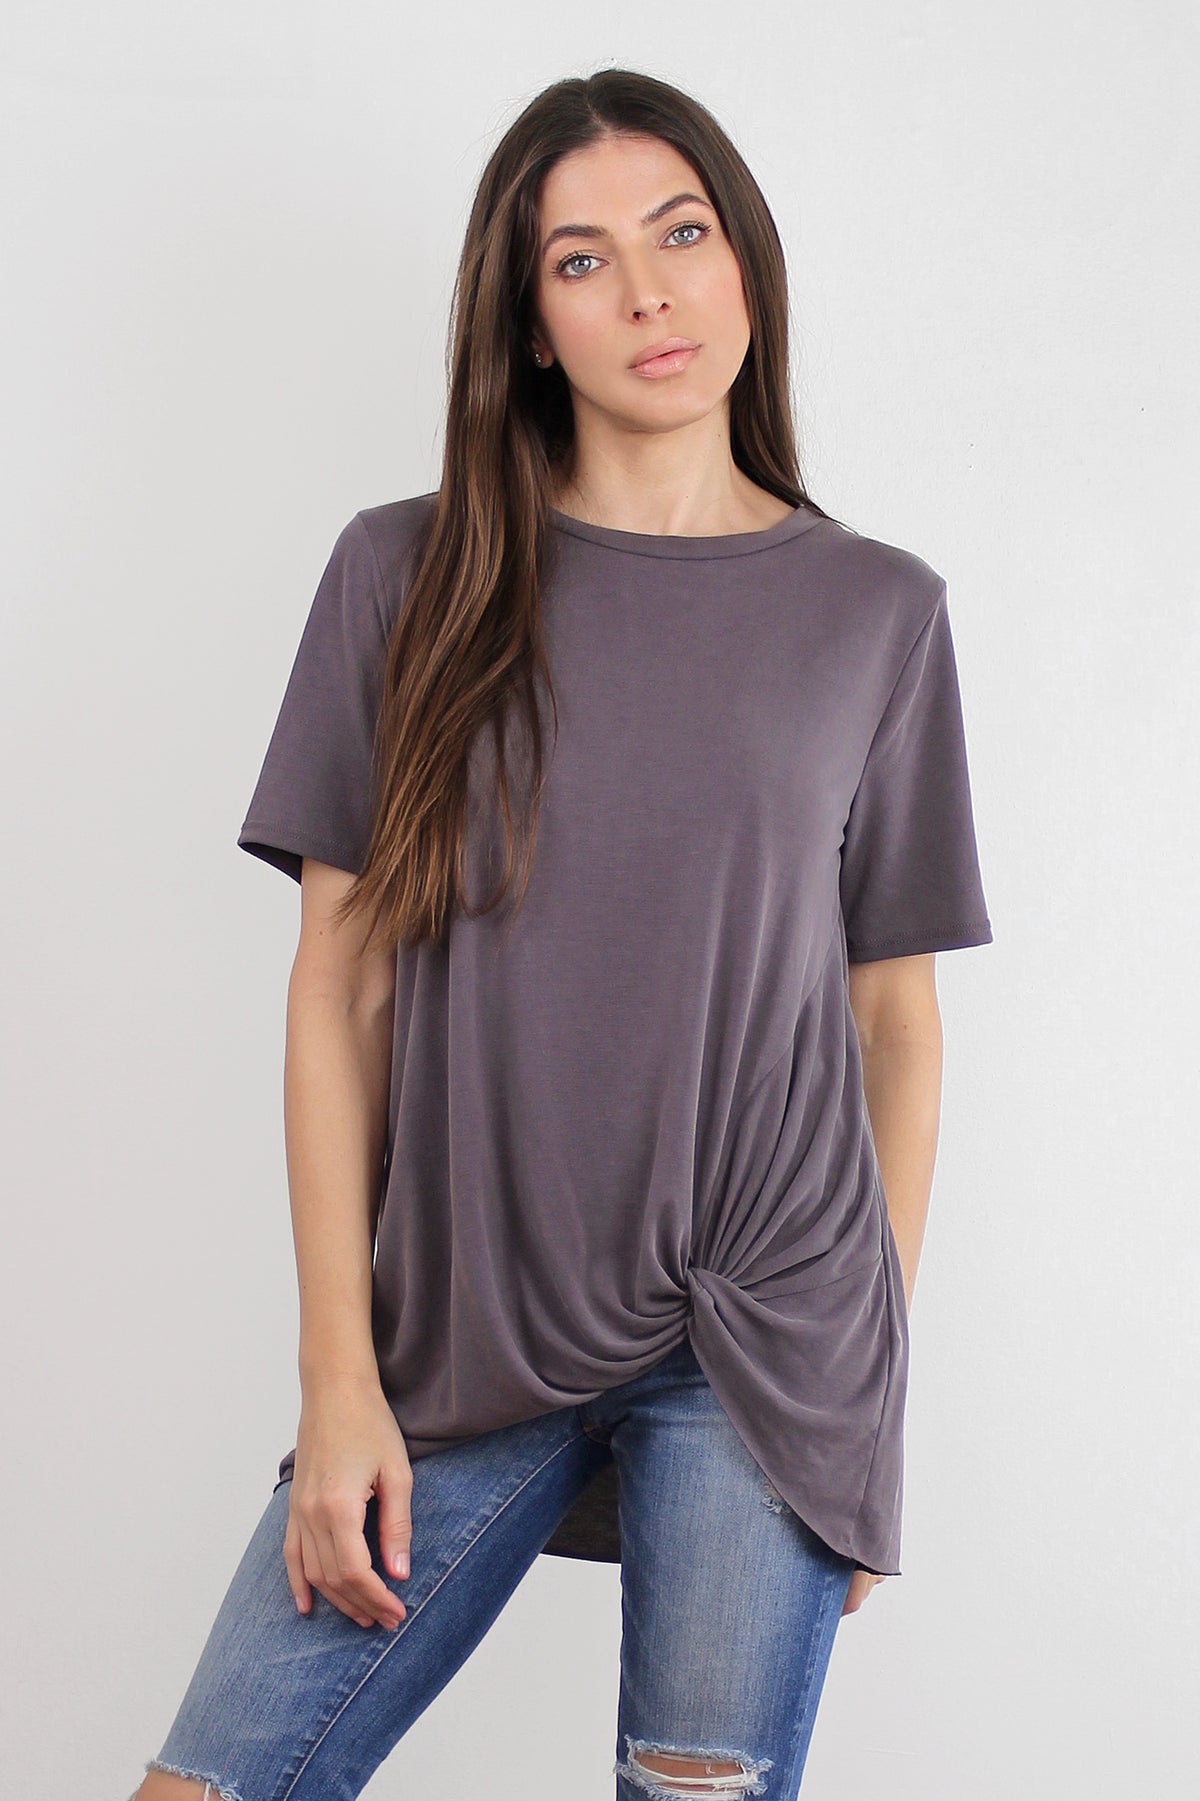 Knot front tee shirt, in dusty plum. Image 3